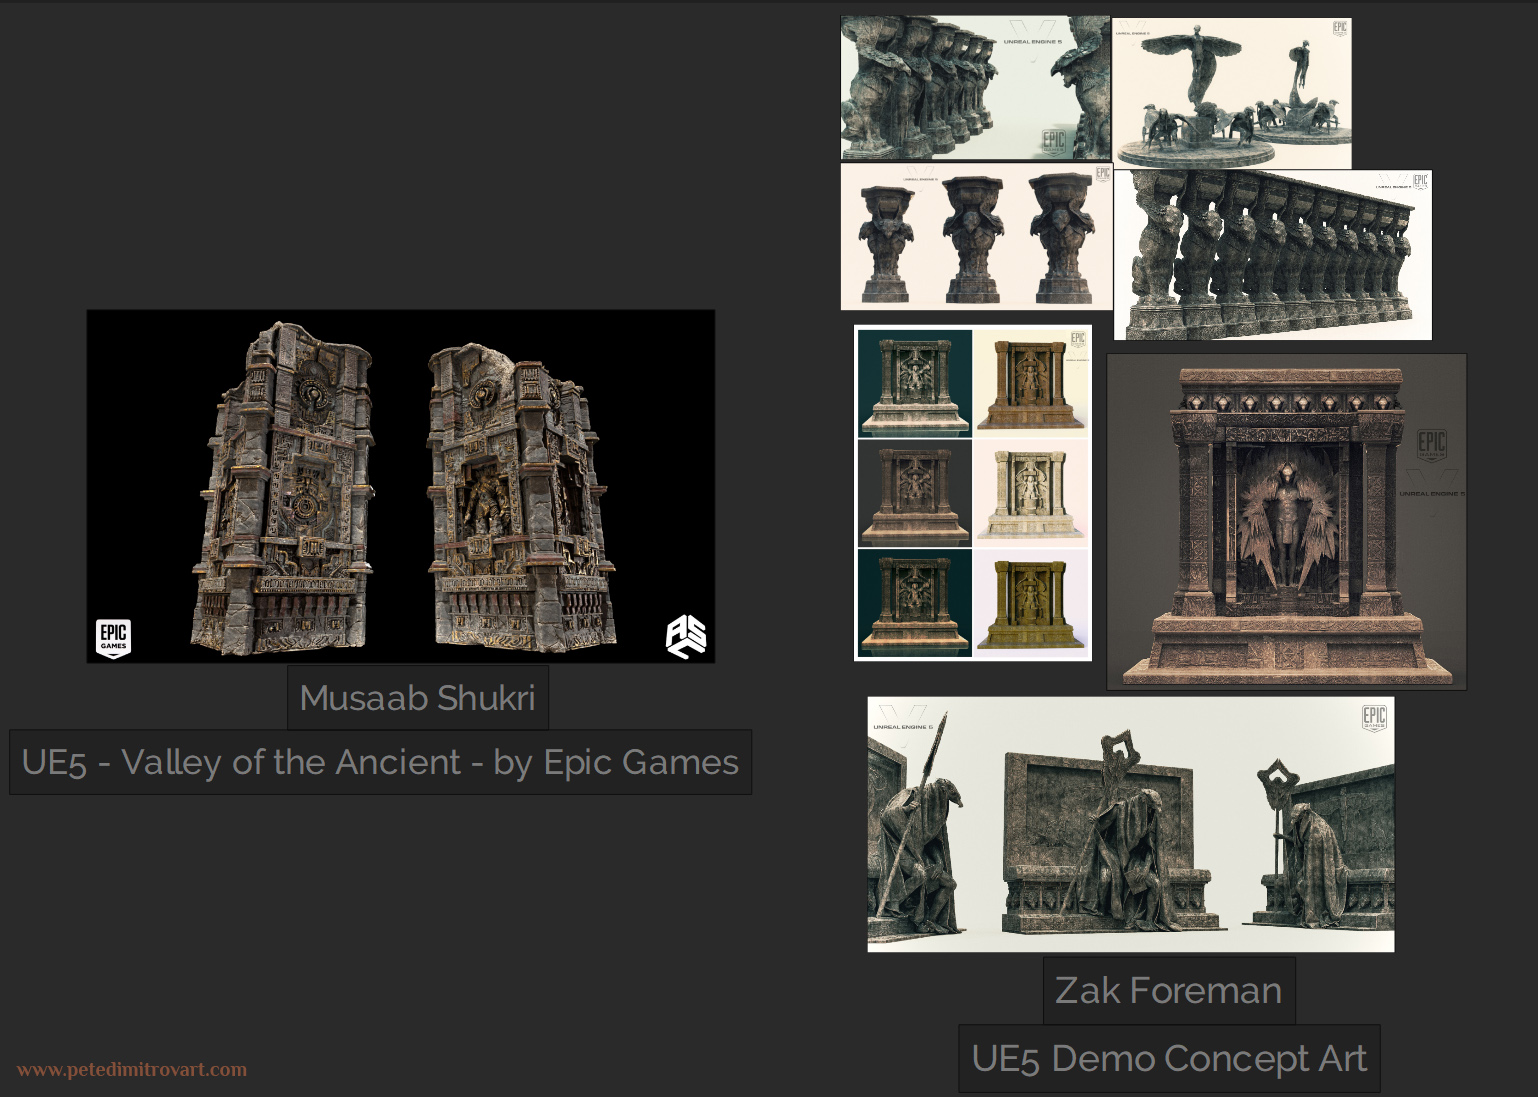 PureRef screenshot. To the left is a sculpt of a pillar with intricate gold motives. Work by Musaab Shukri. To the right are concept sculpts and pieces depicting fantasy deities and creatures. Work by Zak Foreman.